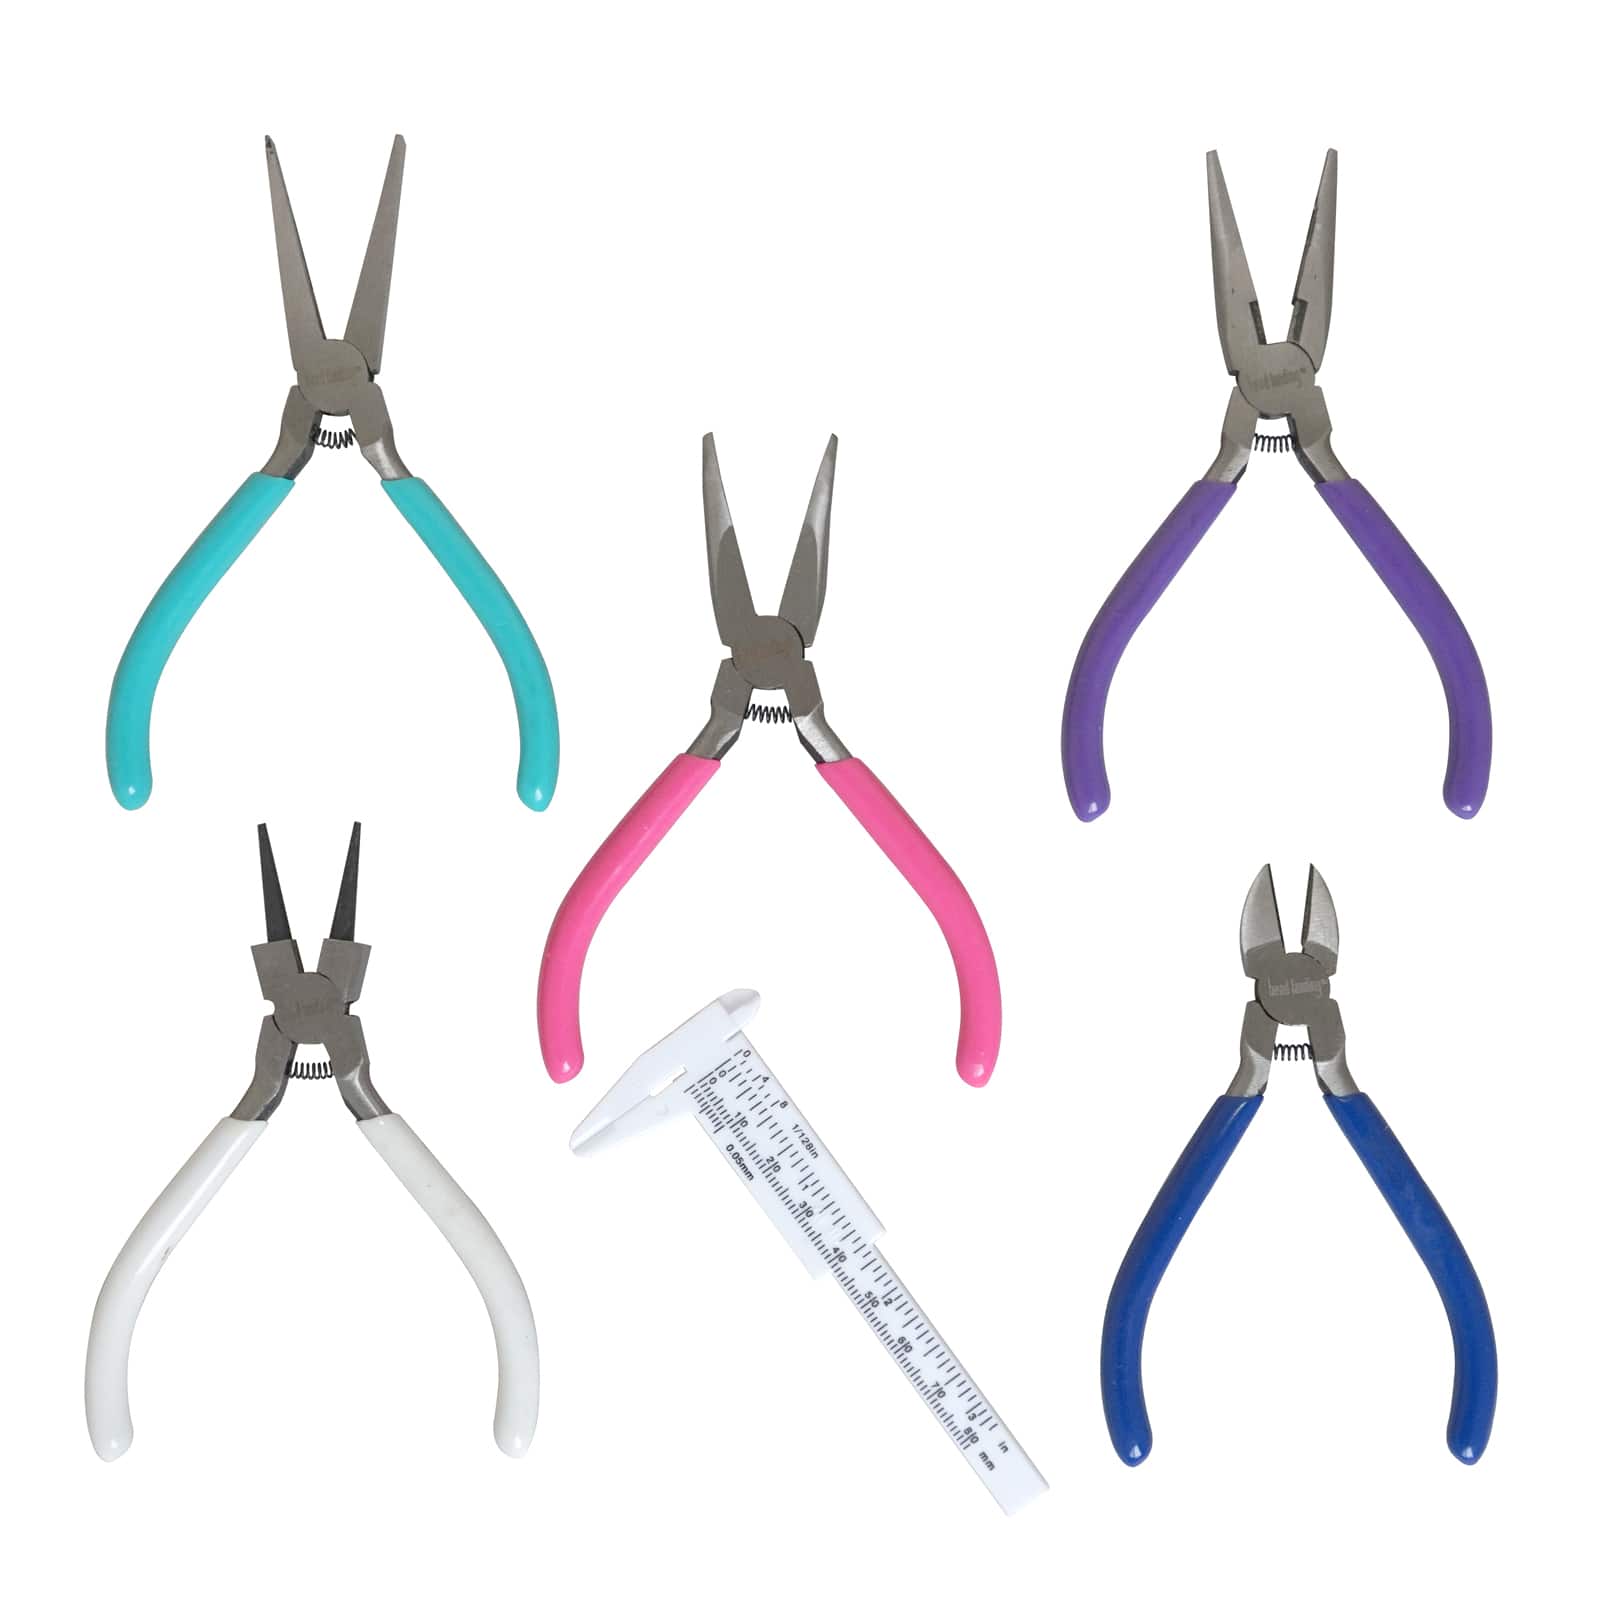 White Model Making Tools Toy Cutting Pliers for Basic Building Craft Tool 